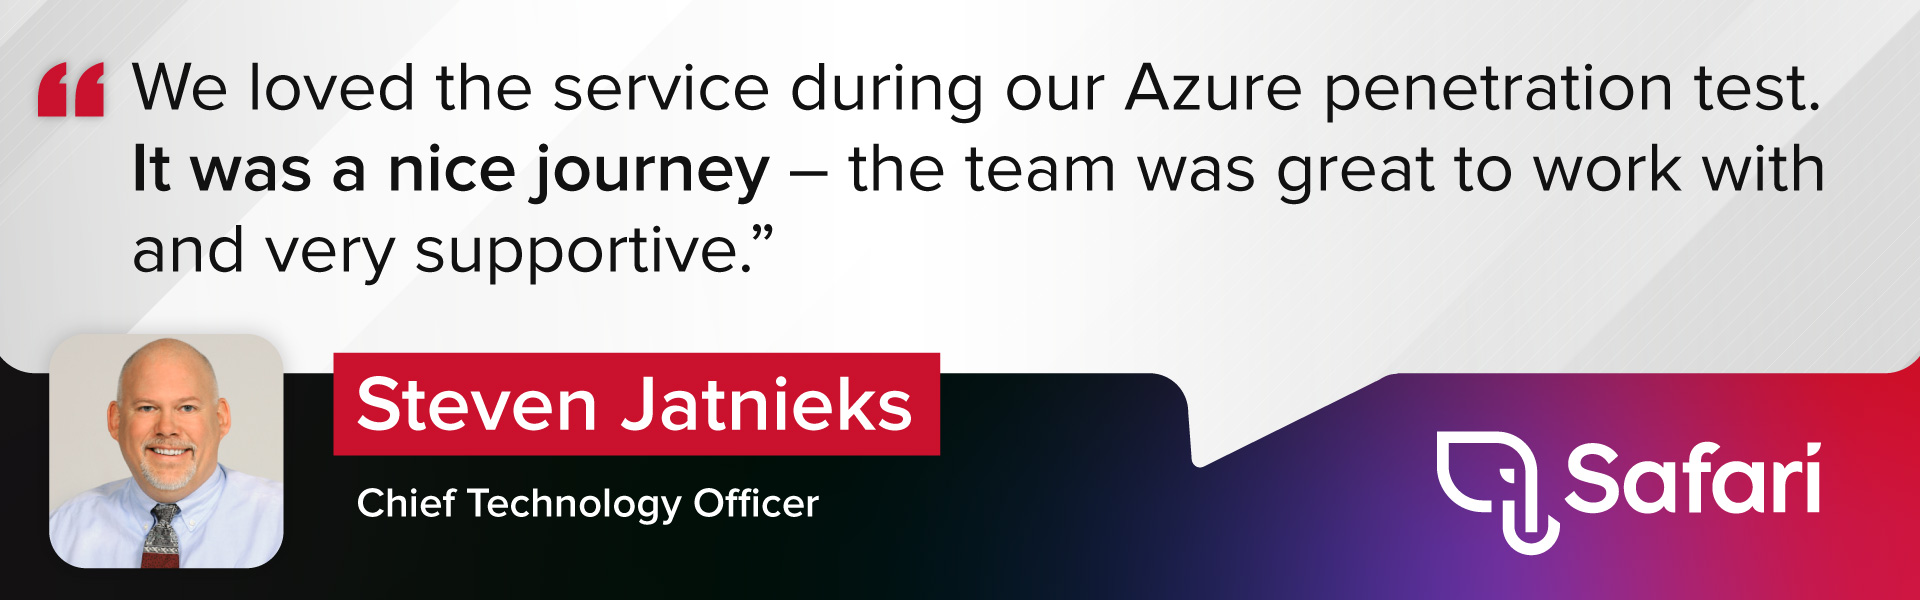 "We loved the service during our Azure penetration test. It was a nice journey – the team was great to work with and very supportive." – Steven Jatnieks, Chief Technology Officer at Safari